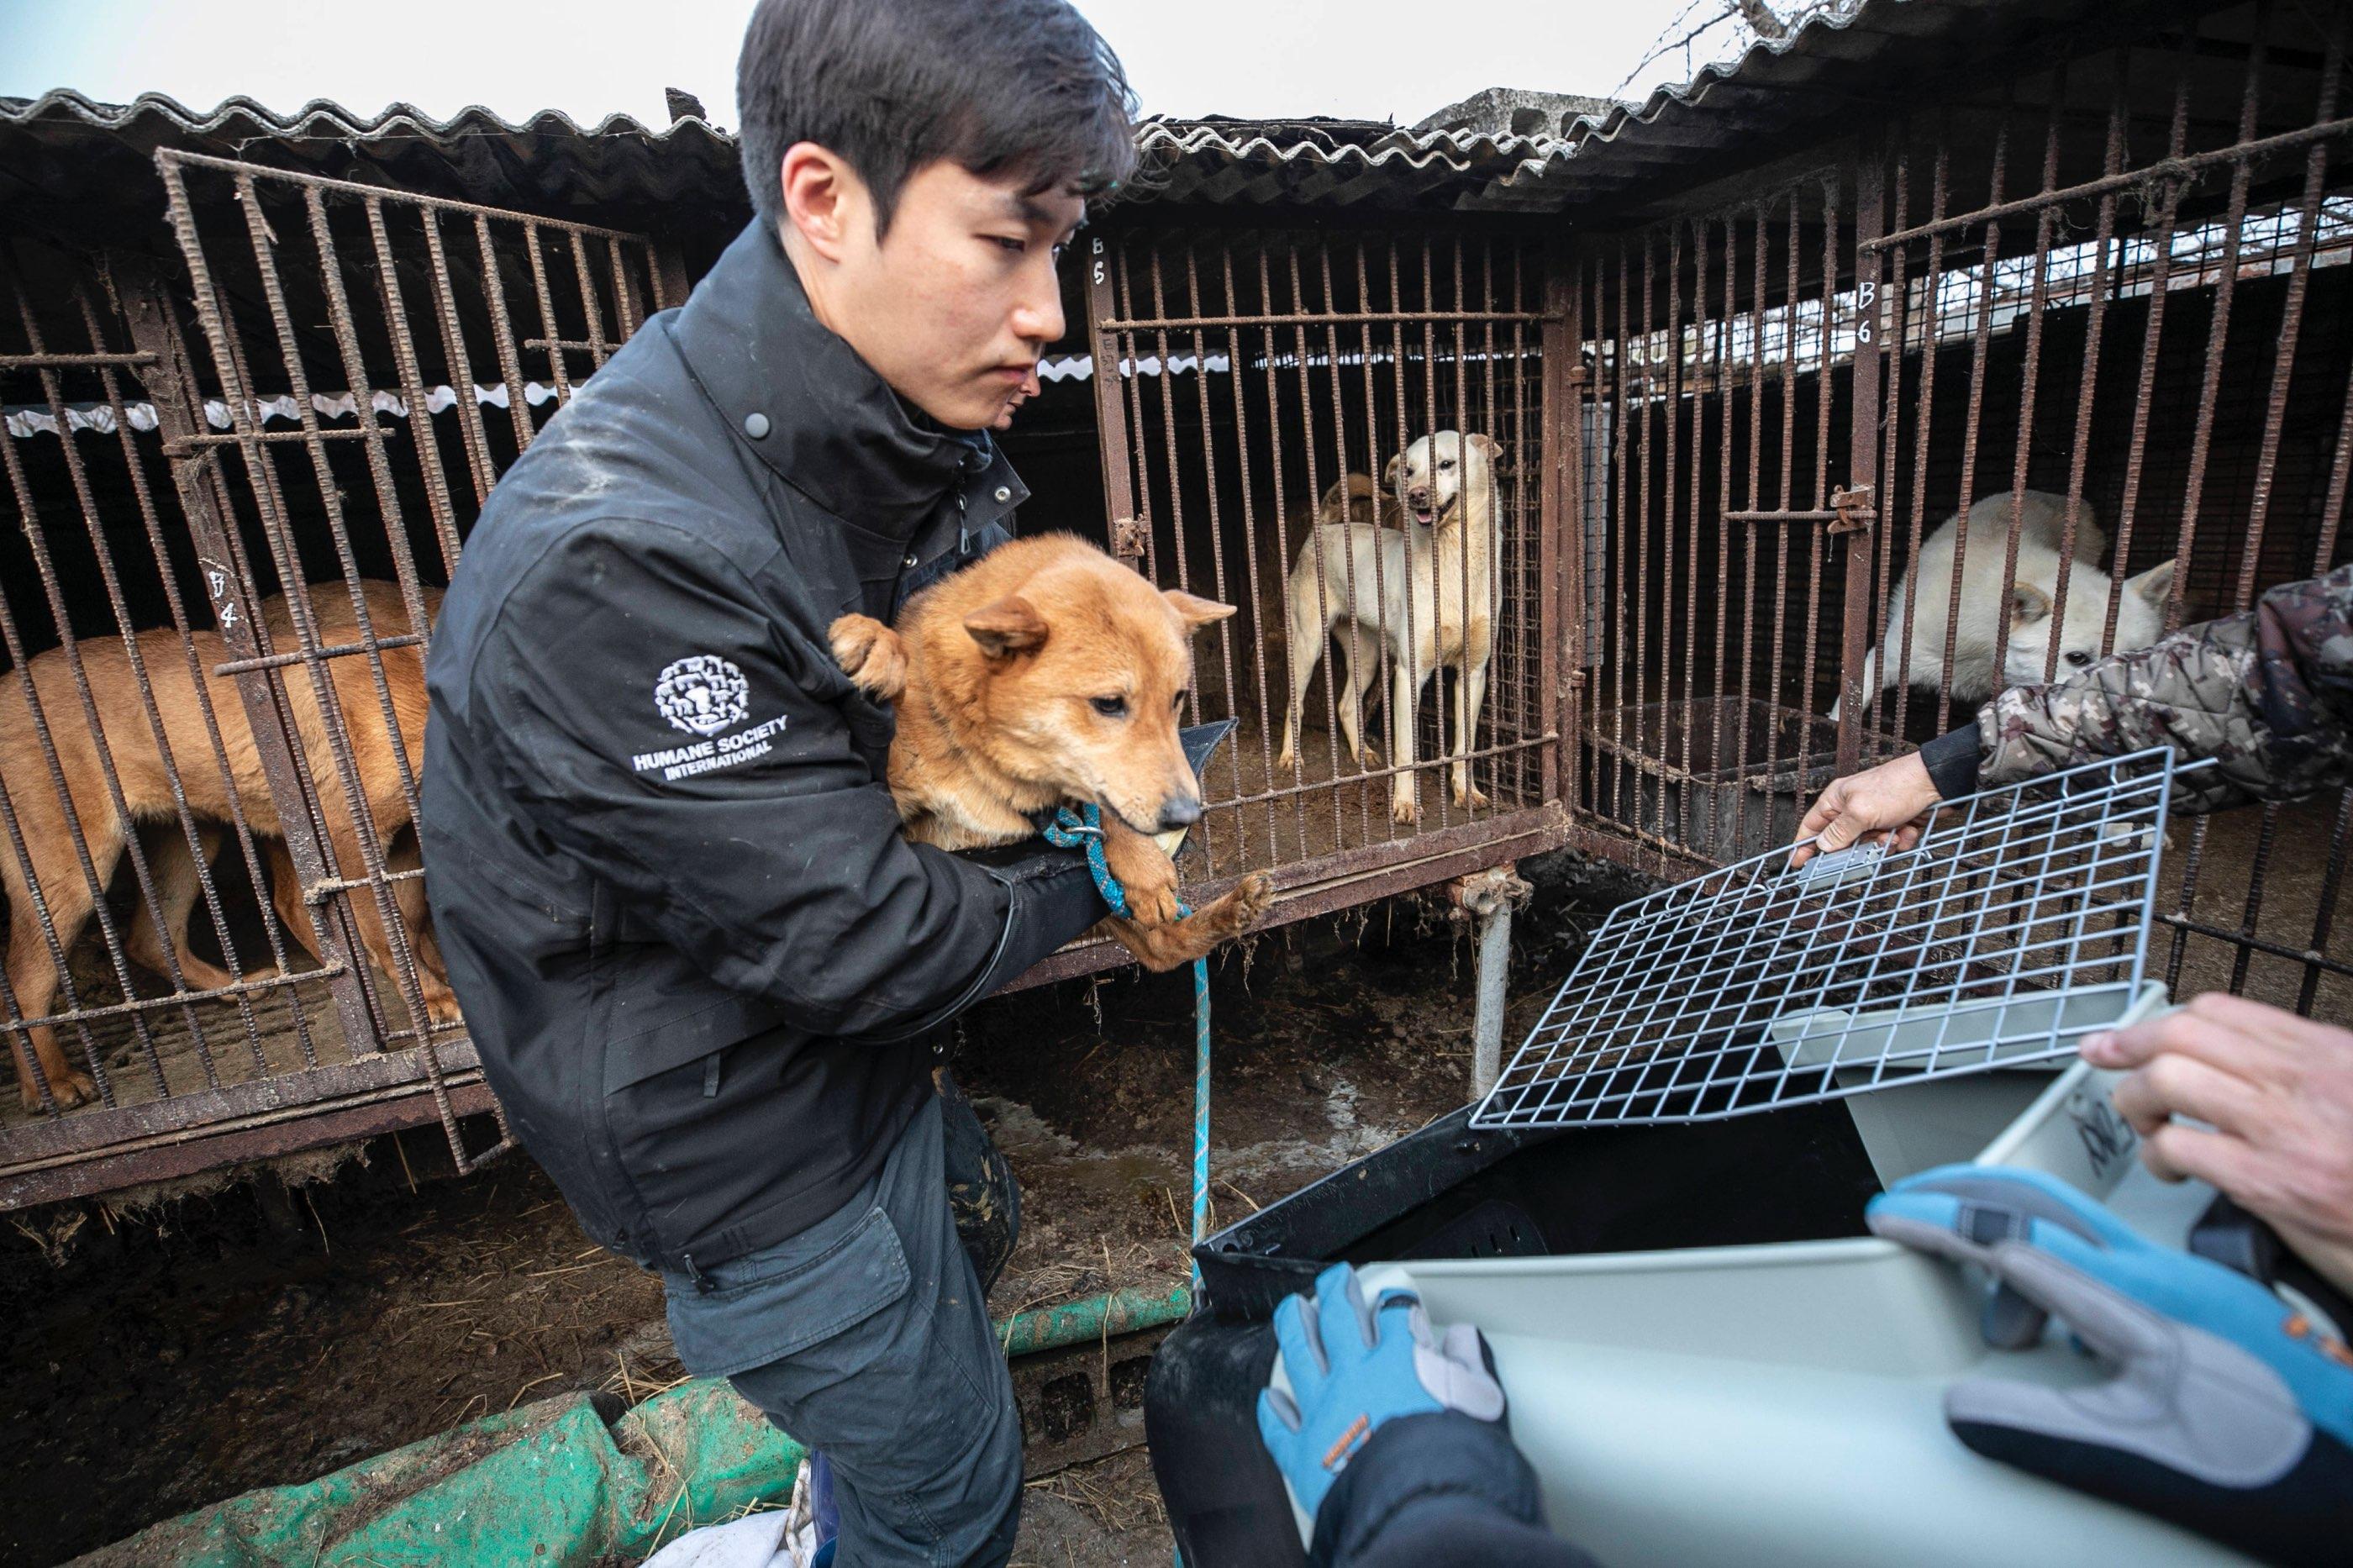 Sangkyung Lee rescues a dog at a dog meat farm in Asan, South Korea, in March 2023.